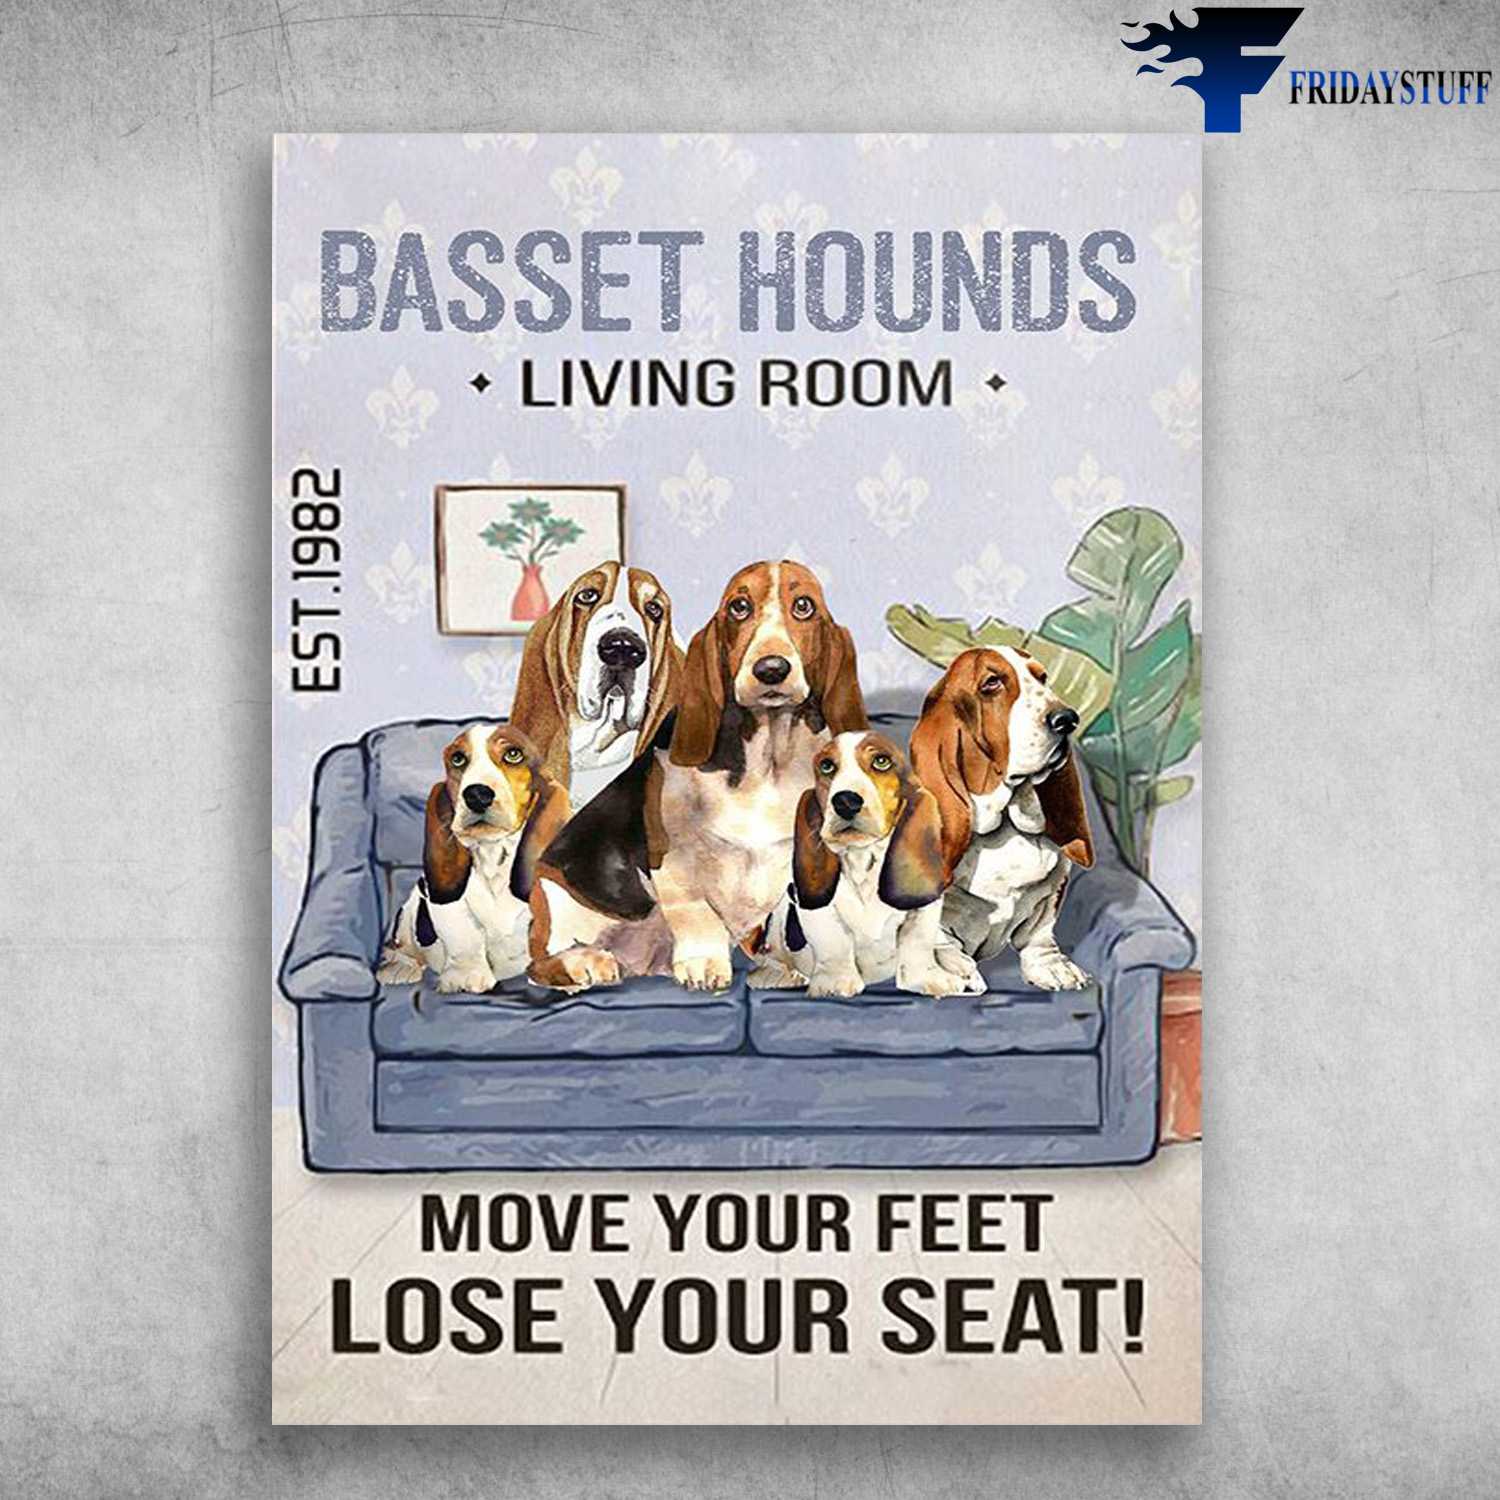 Basset Hounds Family - Basset Hounds Living Room, Love Your Feet, Lose Your Seat, Dog Lover